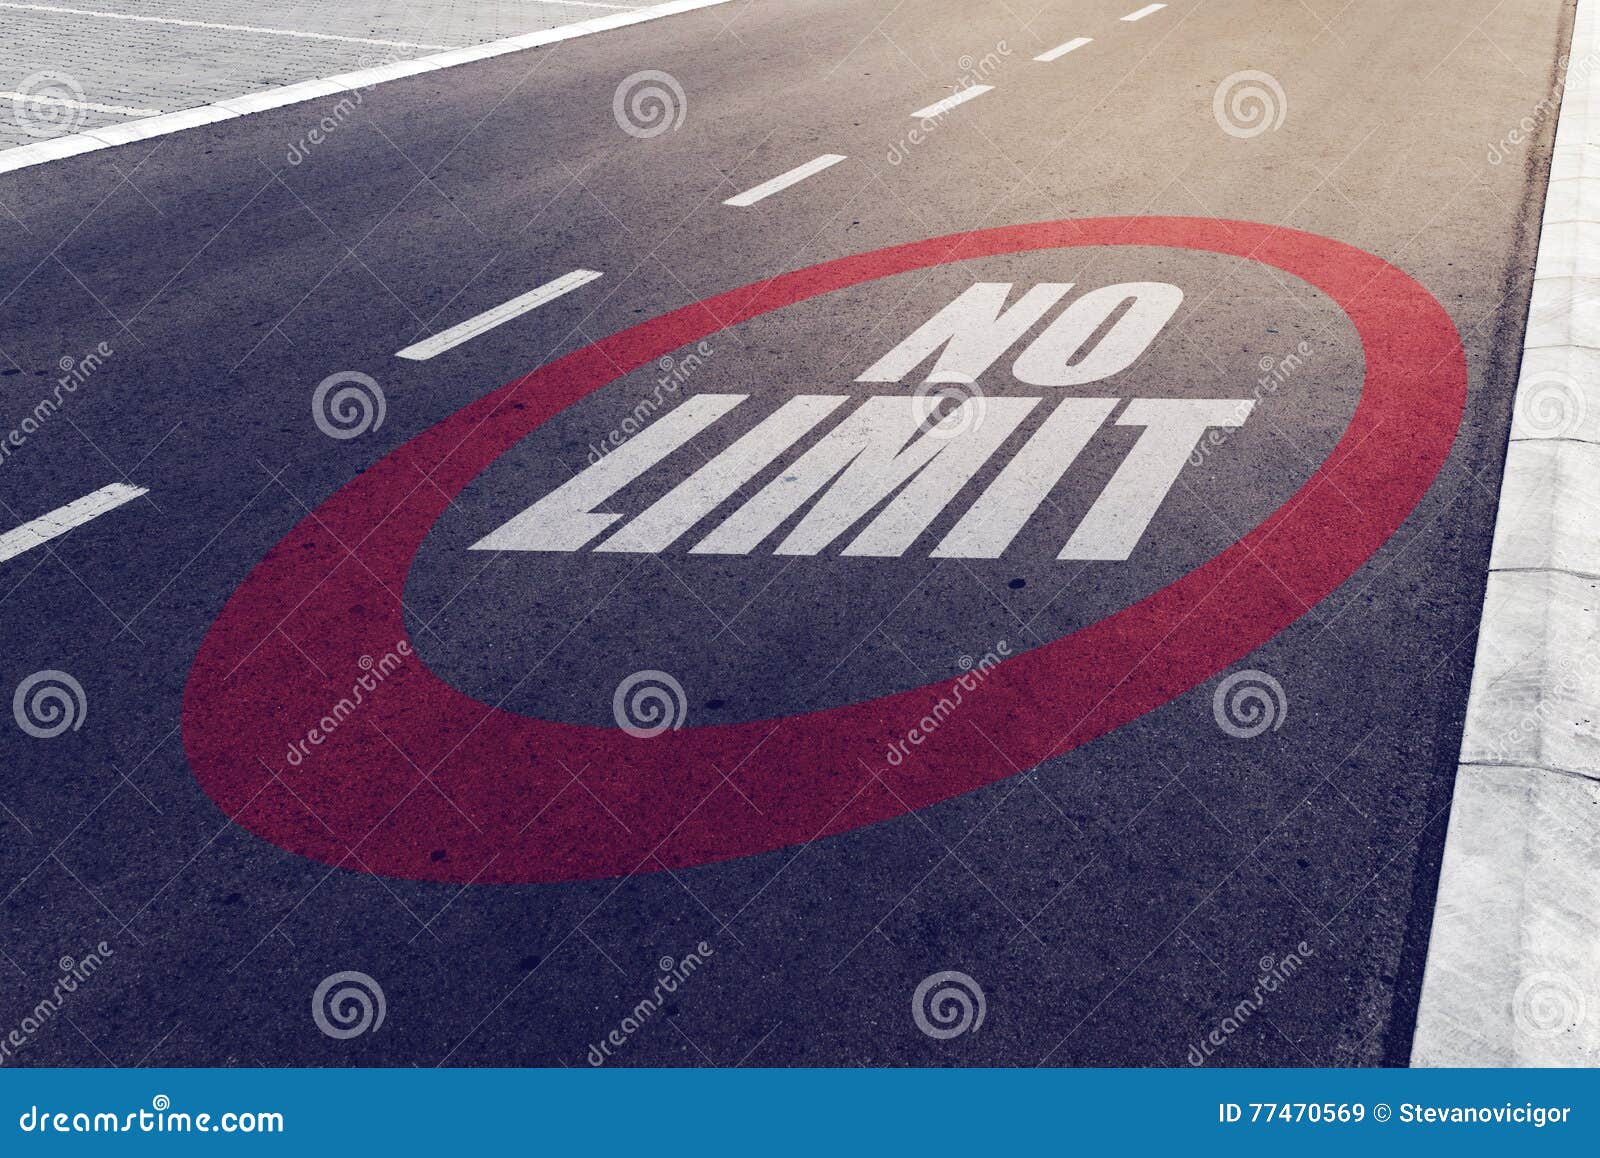 no limit sign on highway